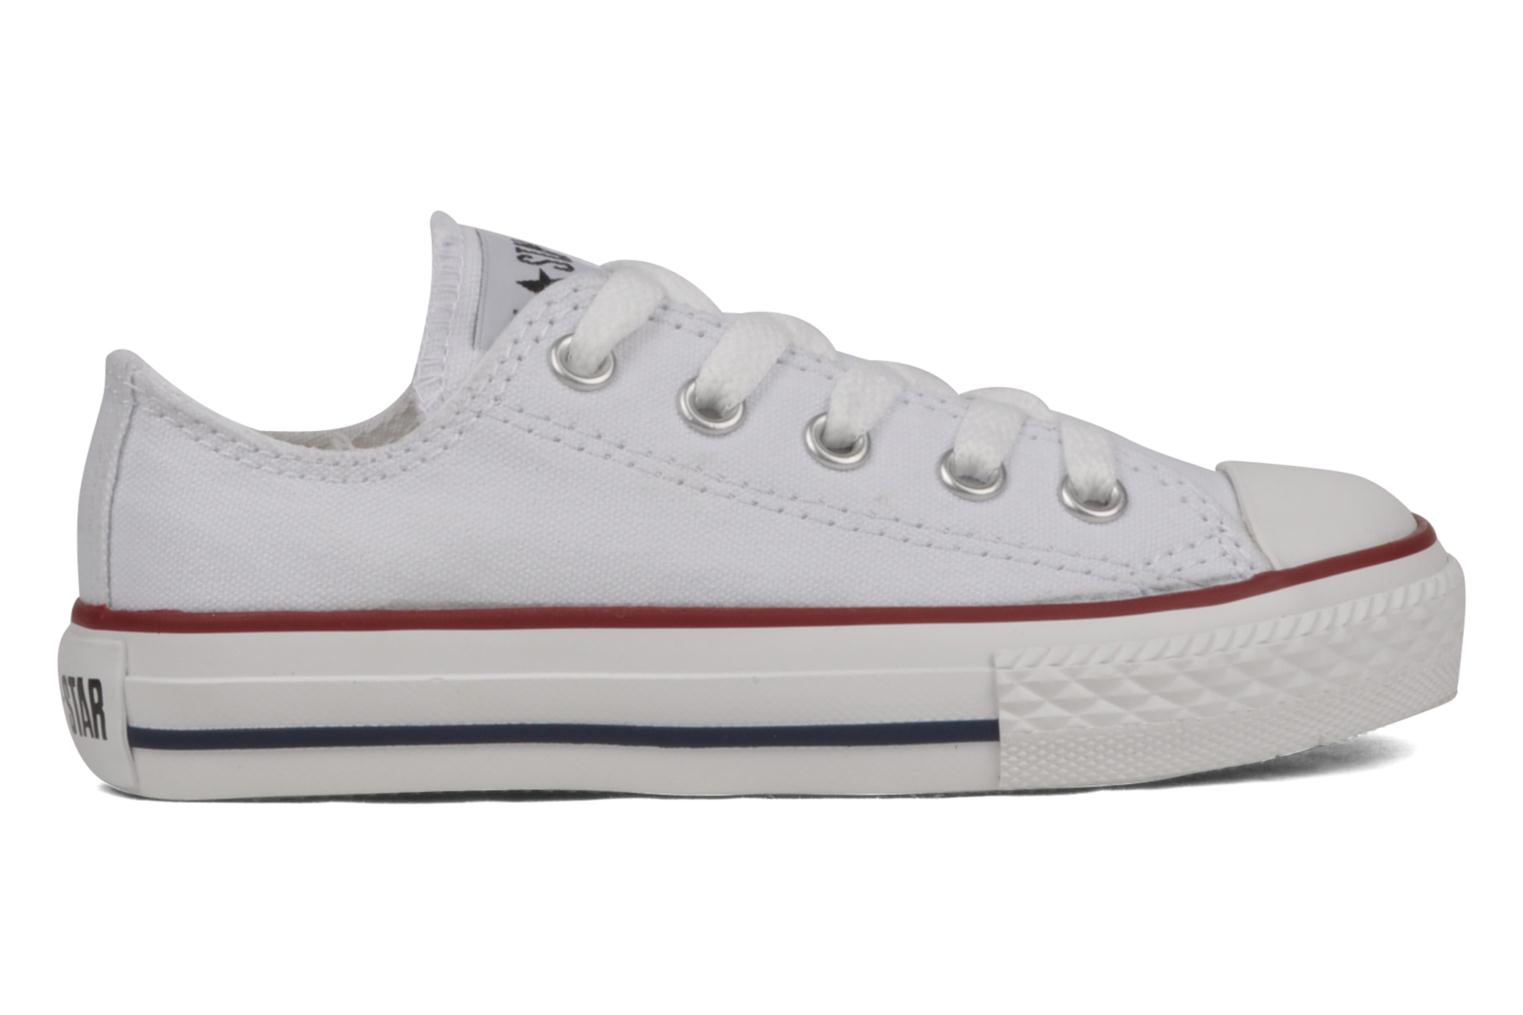 Converse Blanche Basse Taille 35 Outlet, 55% OFF | www.dalmar.it